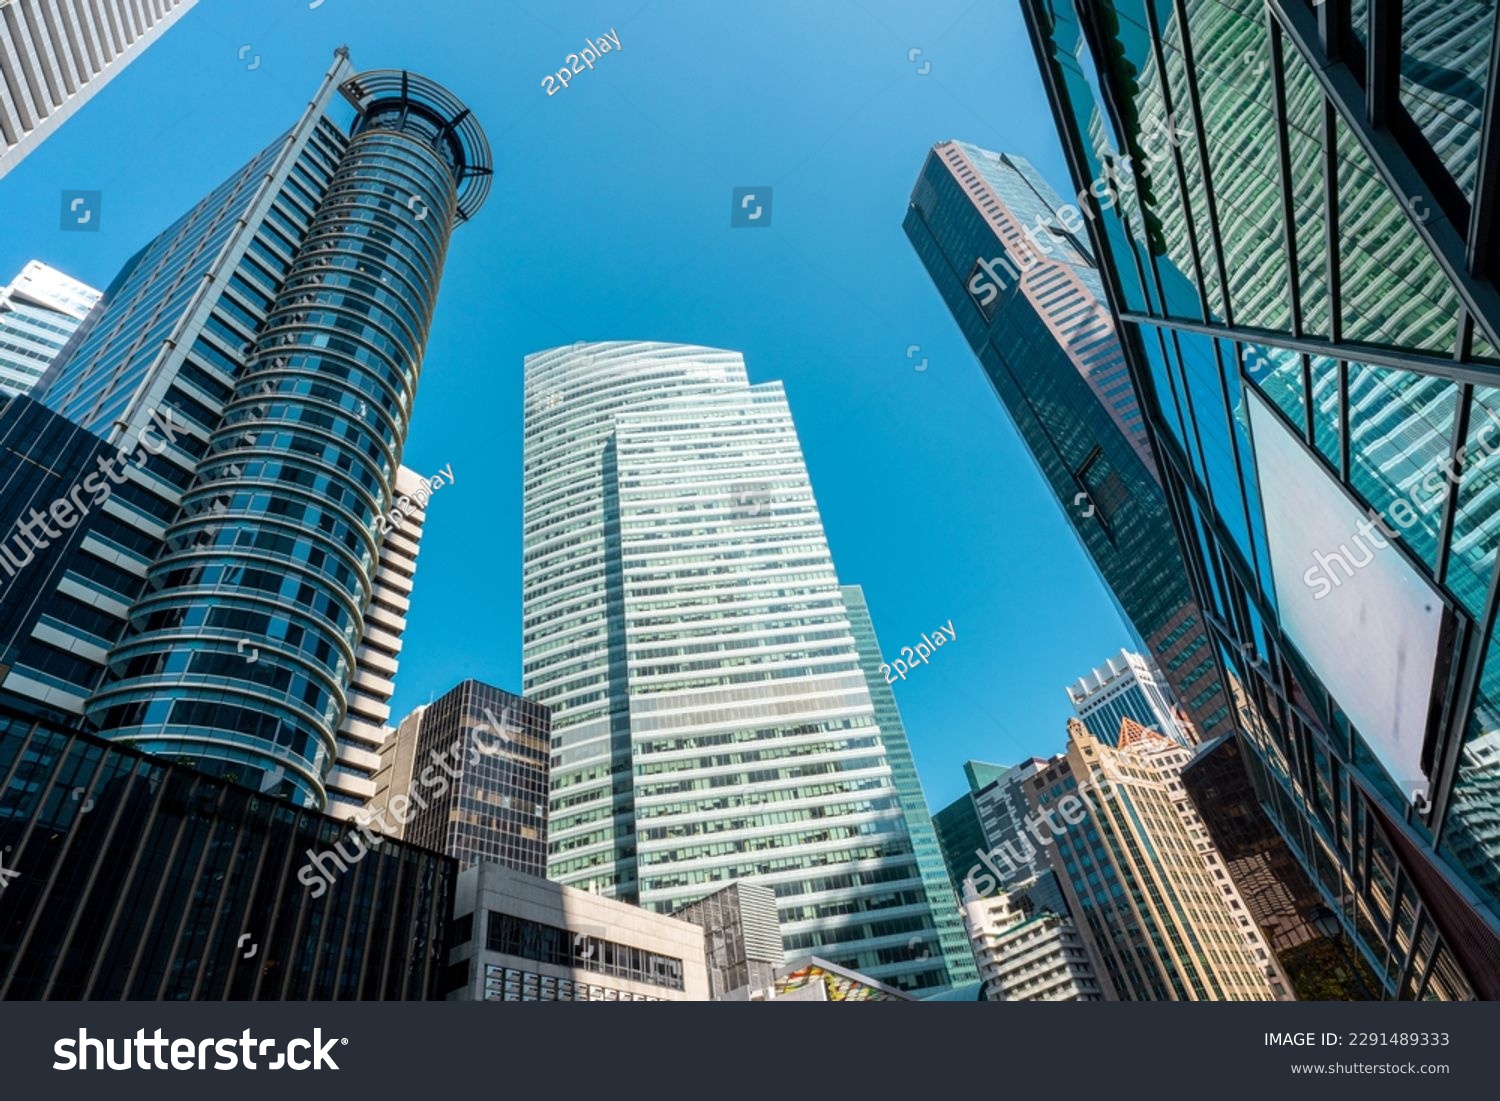 View low angle Singapore central business district, a modern financial building district area in Raffles Place, Singapore. #2291489333